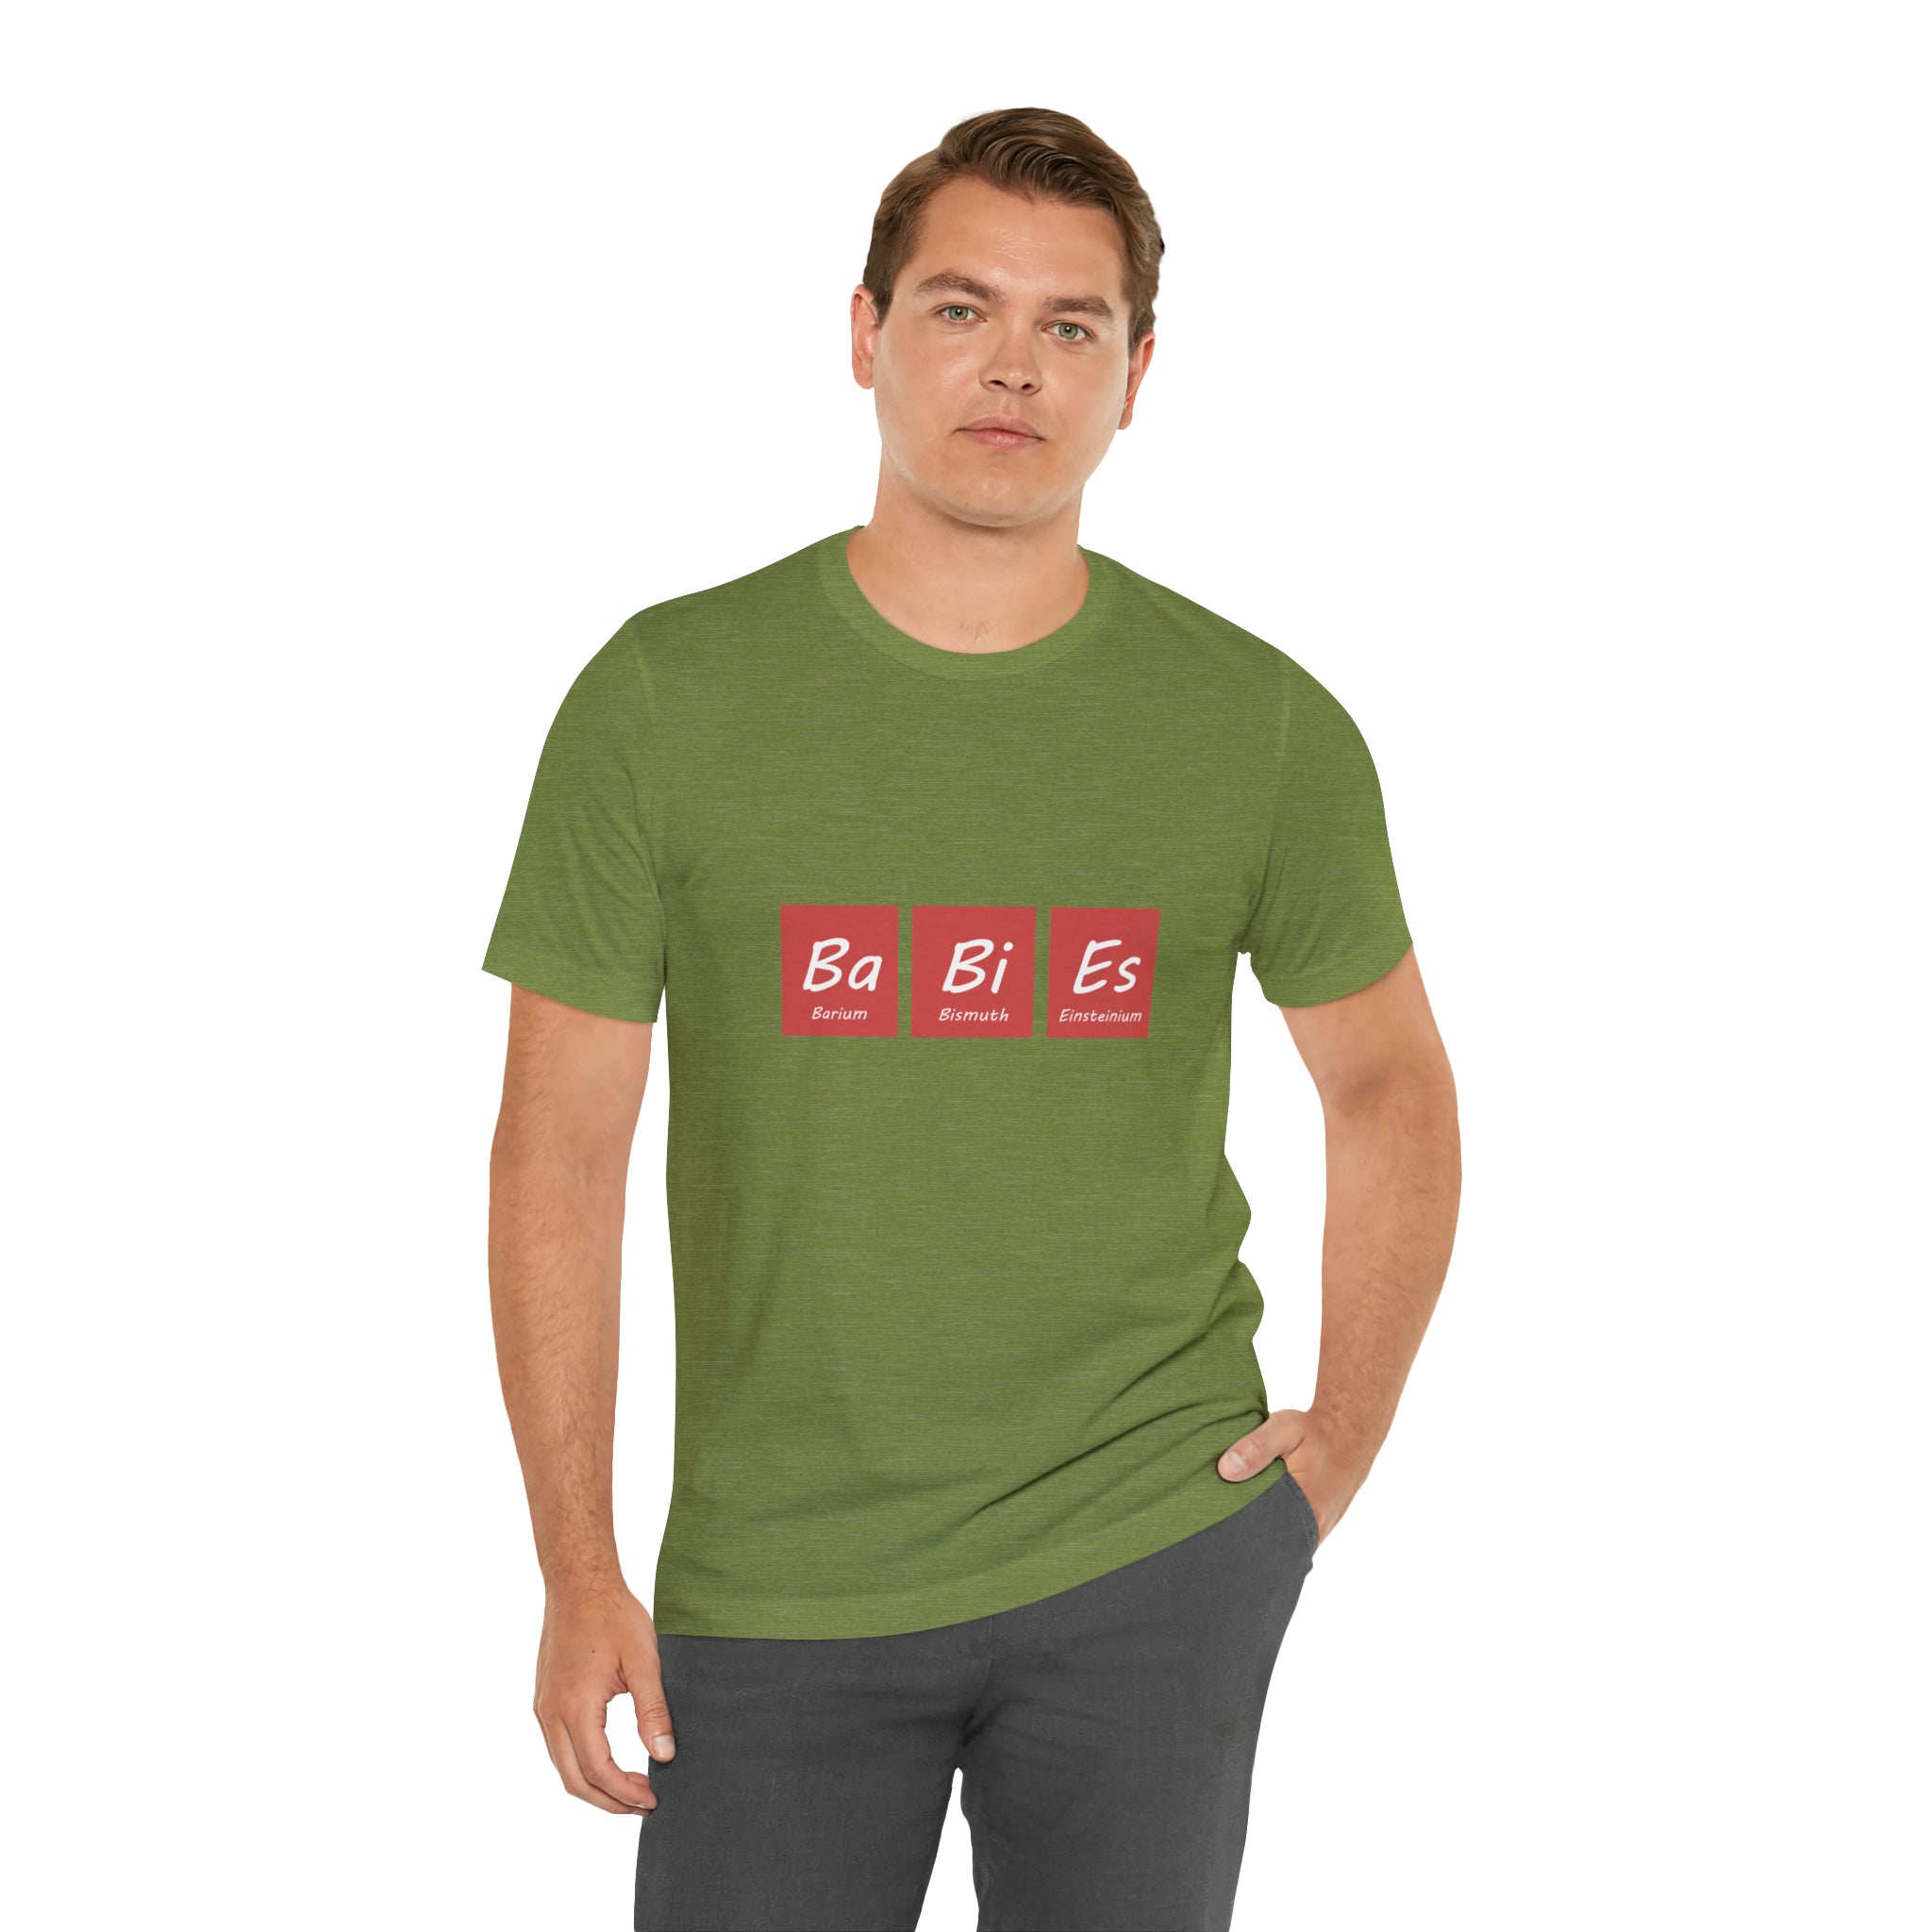 A man wearing a Ba - Bi - Es T-Shirt with unique color combinations, featuring red and green squares.